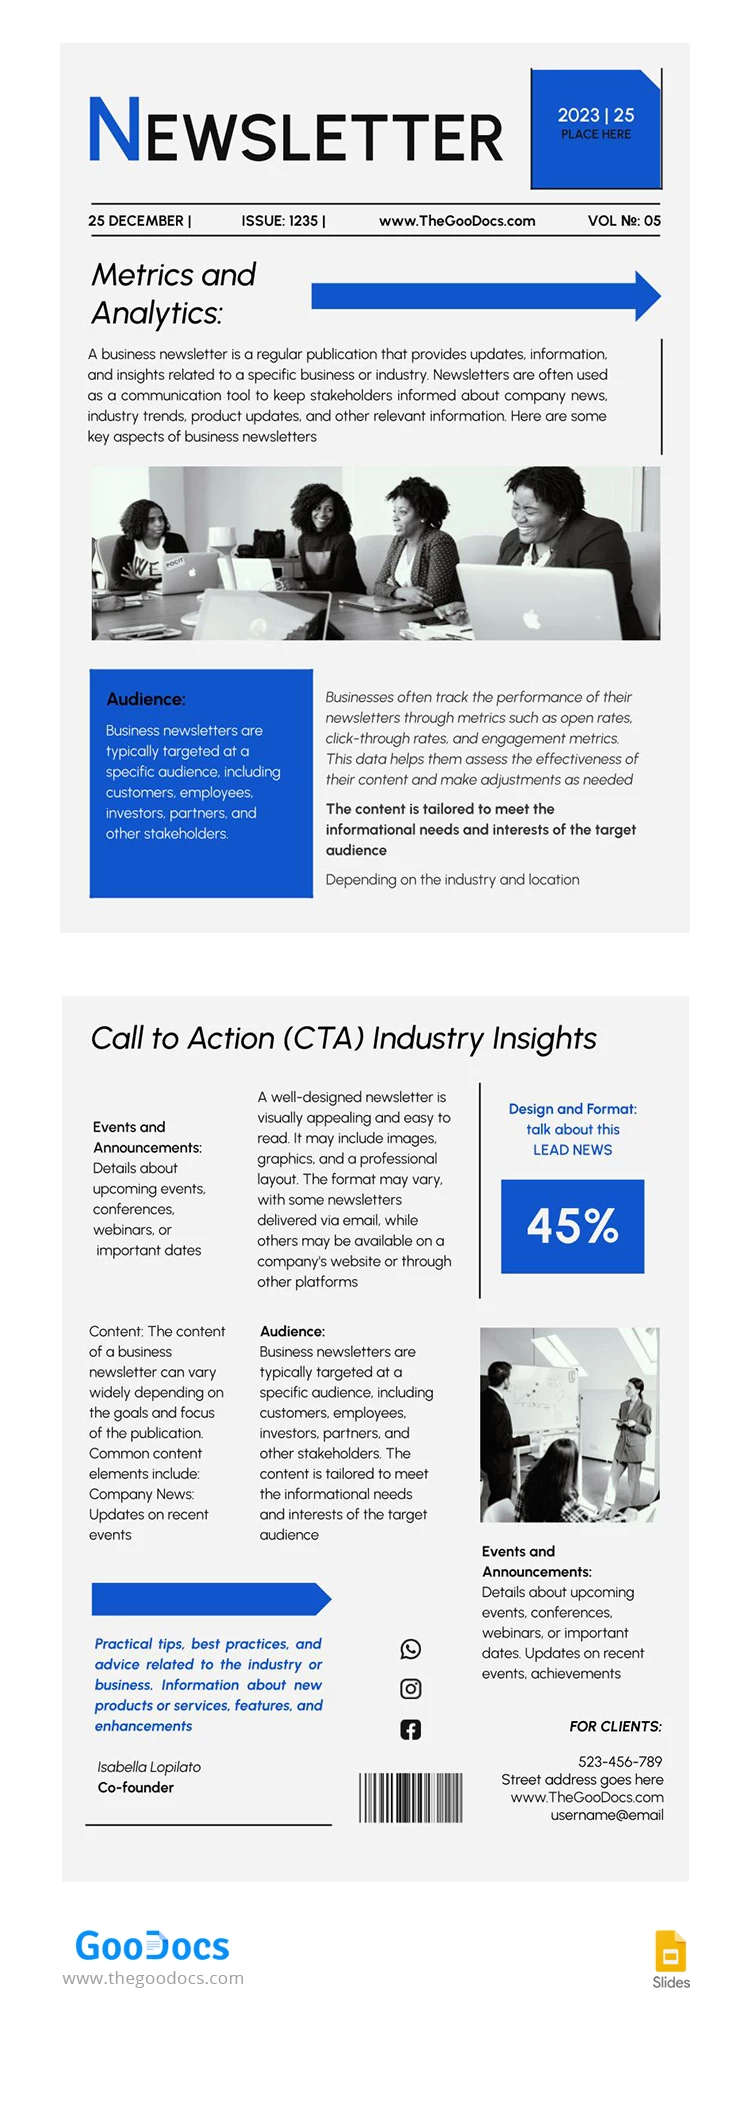 Industry Company Newsletter - free Google Docs Template - 10067771